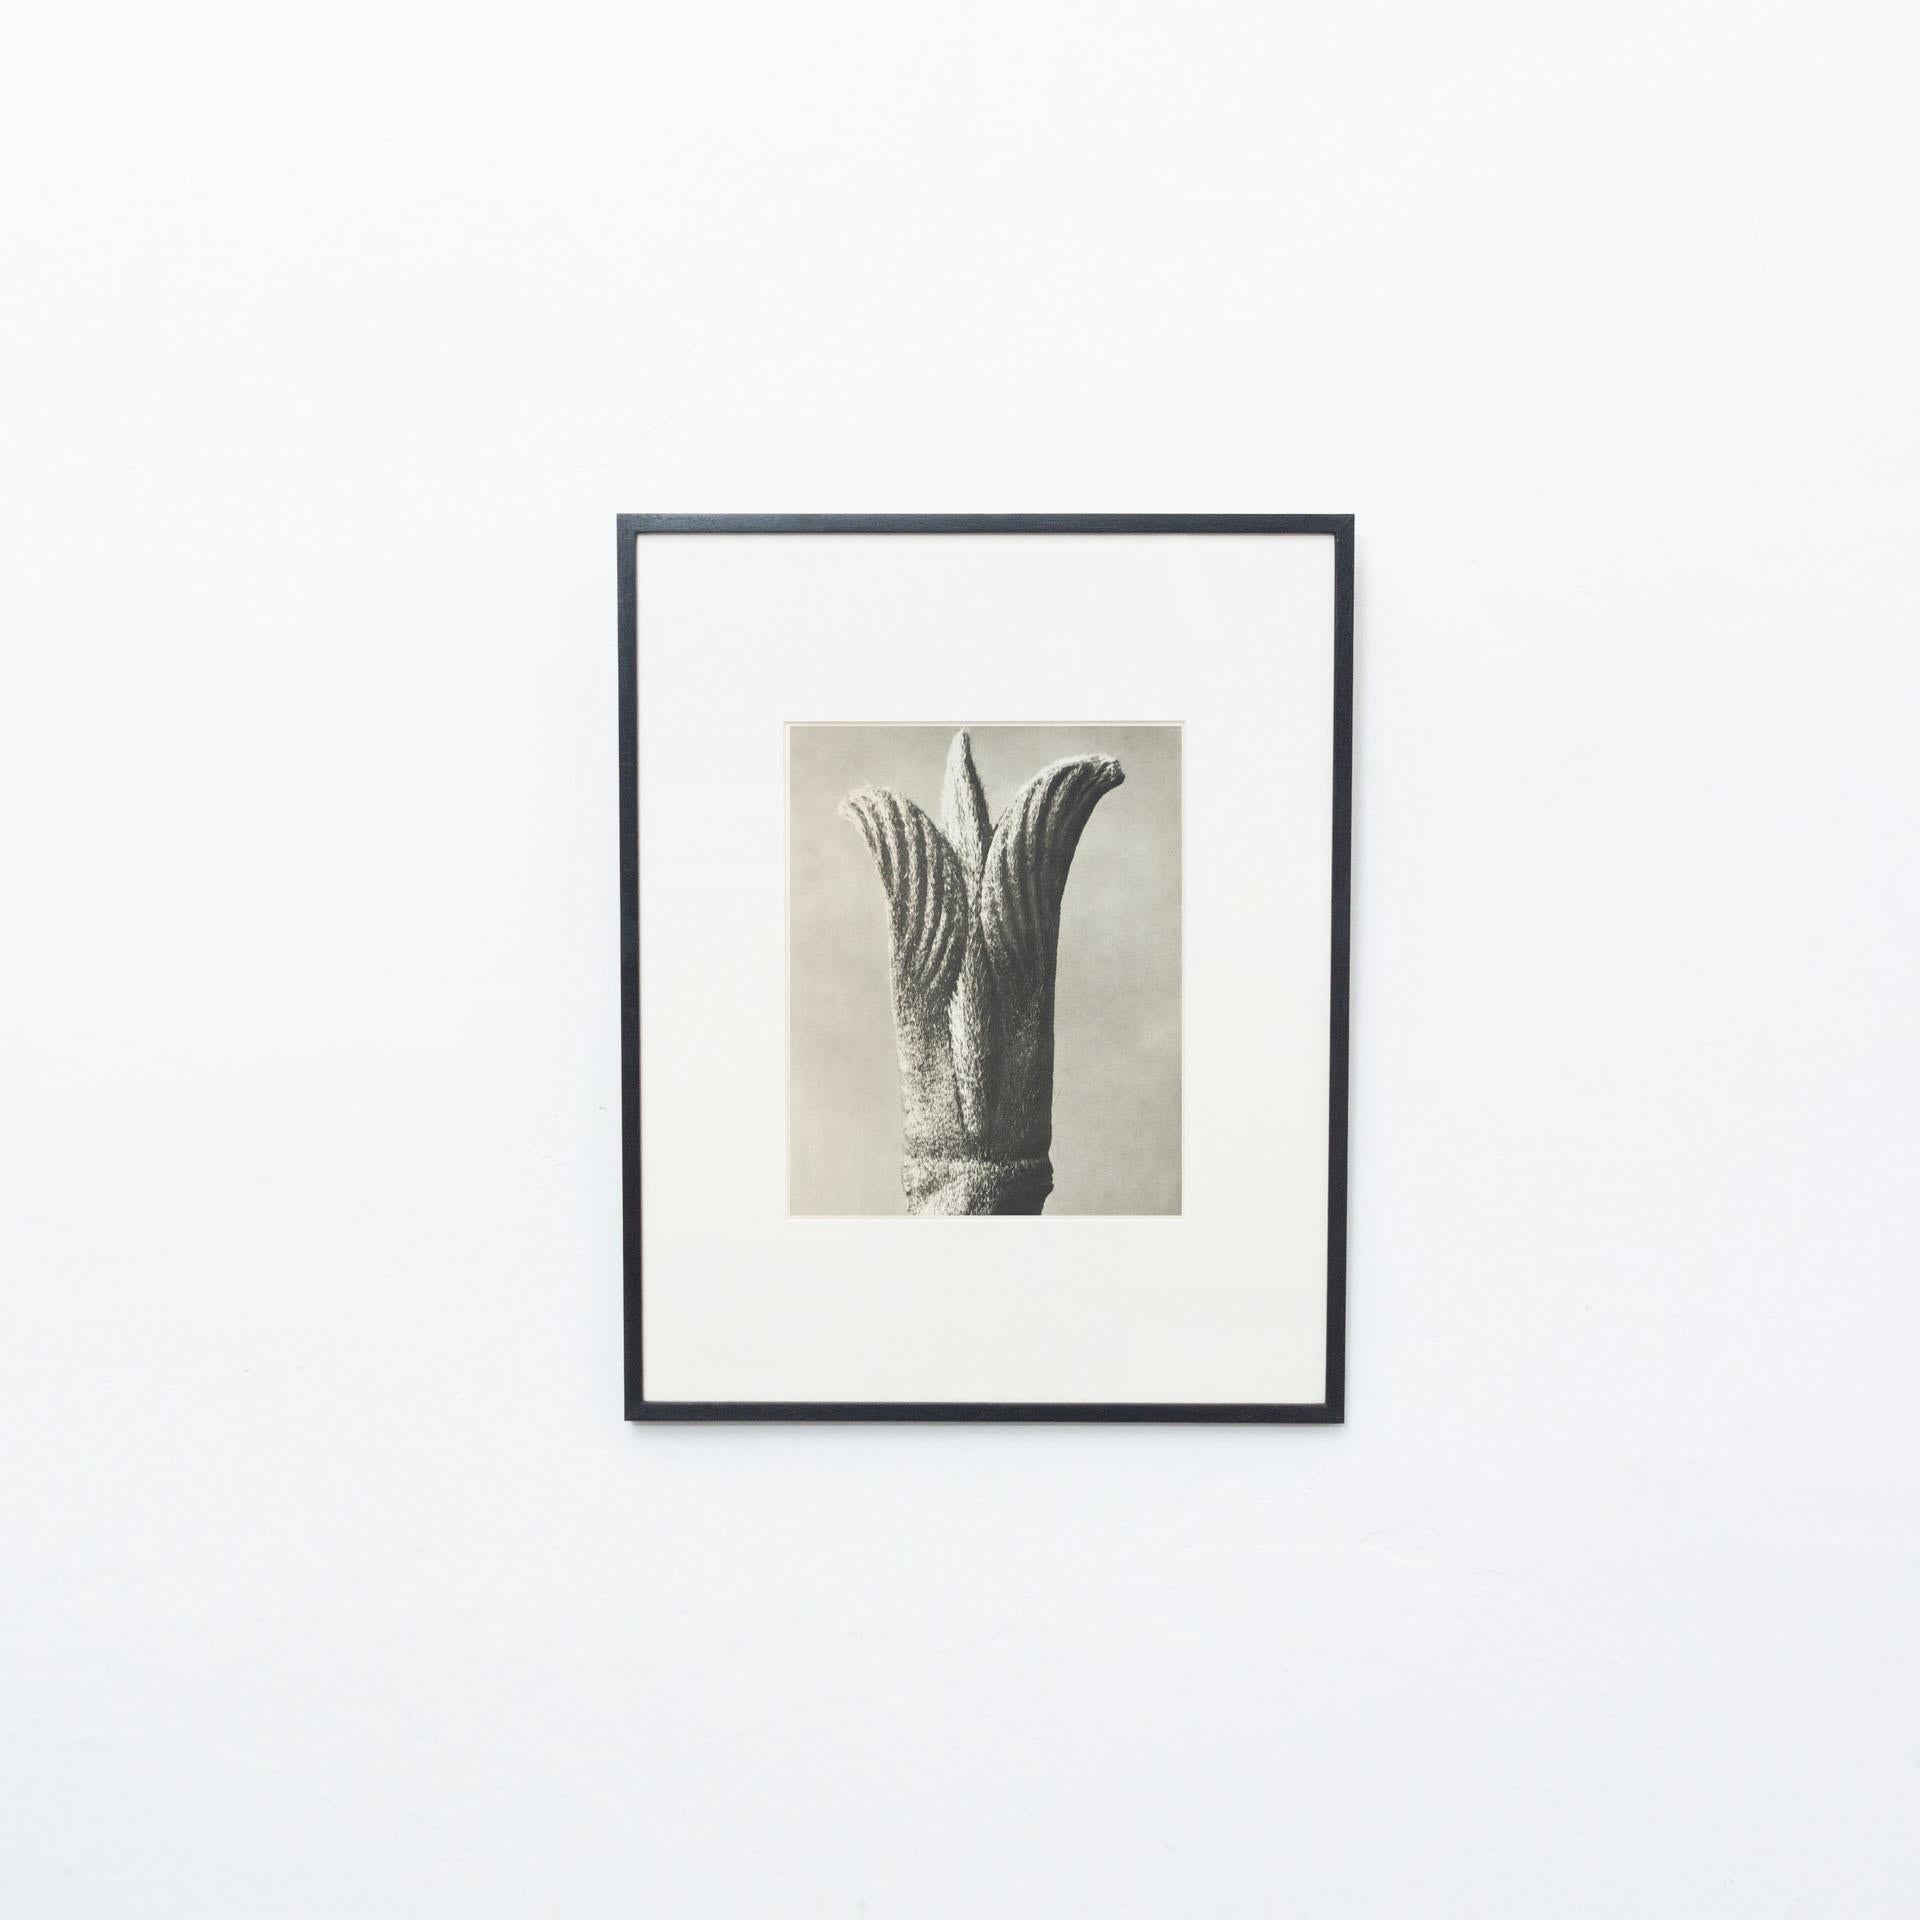 Karl Blossfeldt Photogravure from the edition of the book 'Wunder in der Natur' in 1942.

Photography number 77. 
In original condition, with minor wear consistent with age and use, preserving a beautiful patina.

Karl Blossfeldt (June 13, 1865